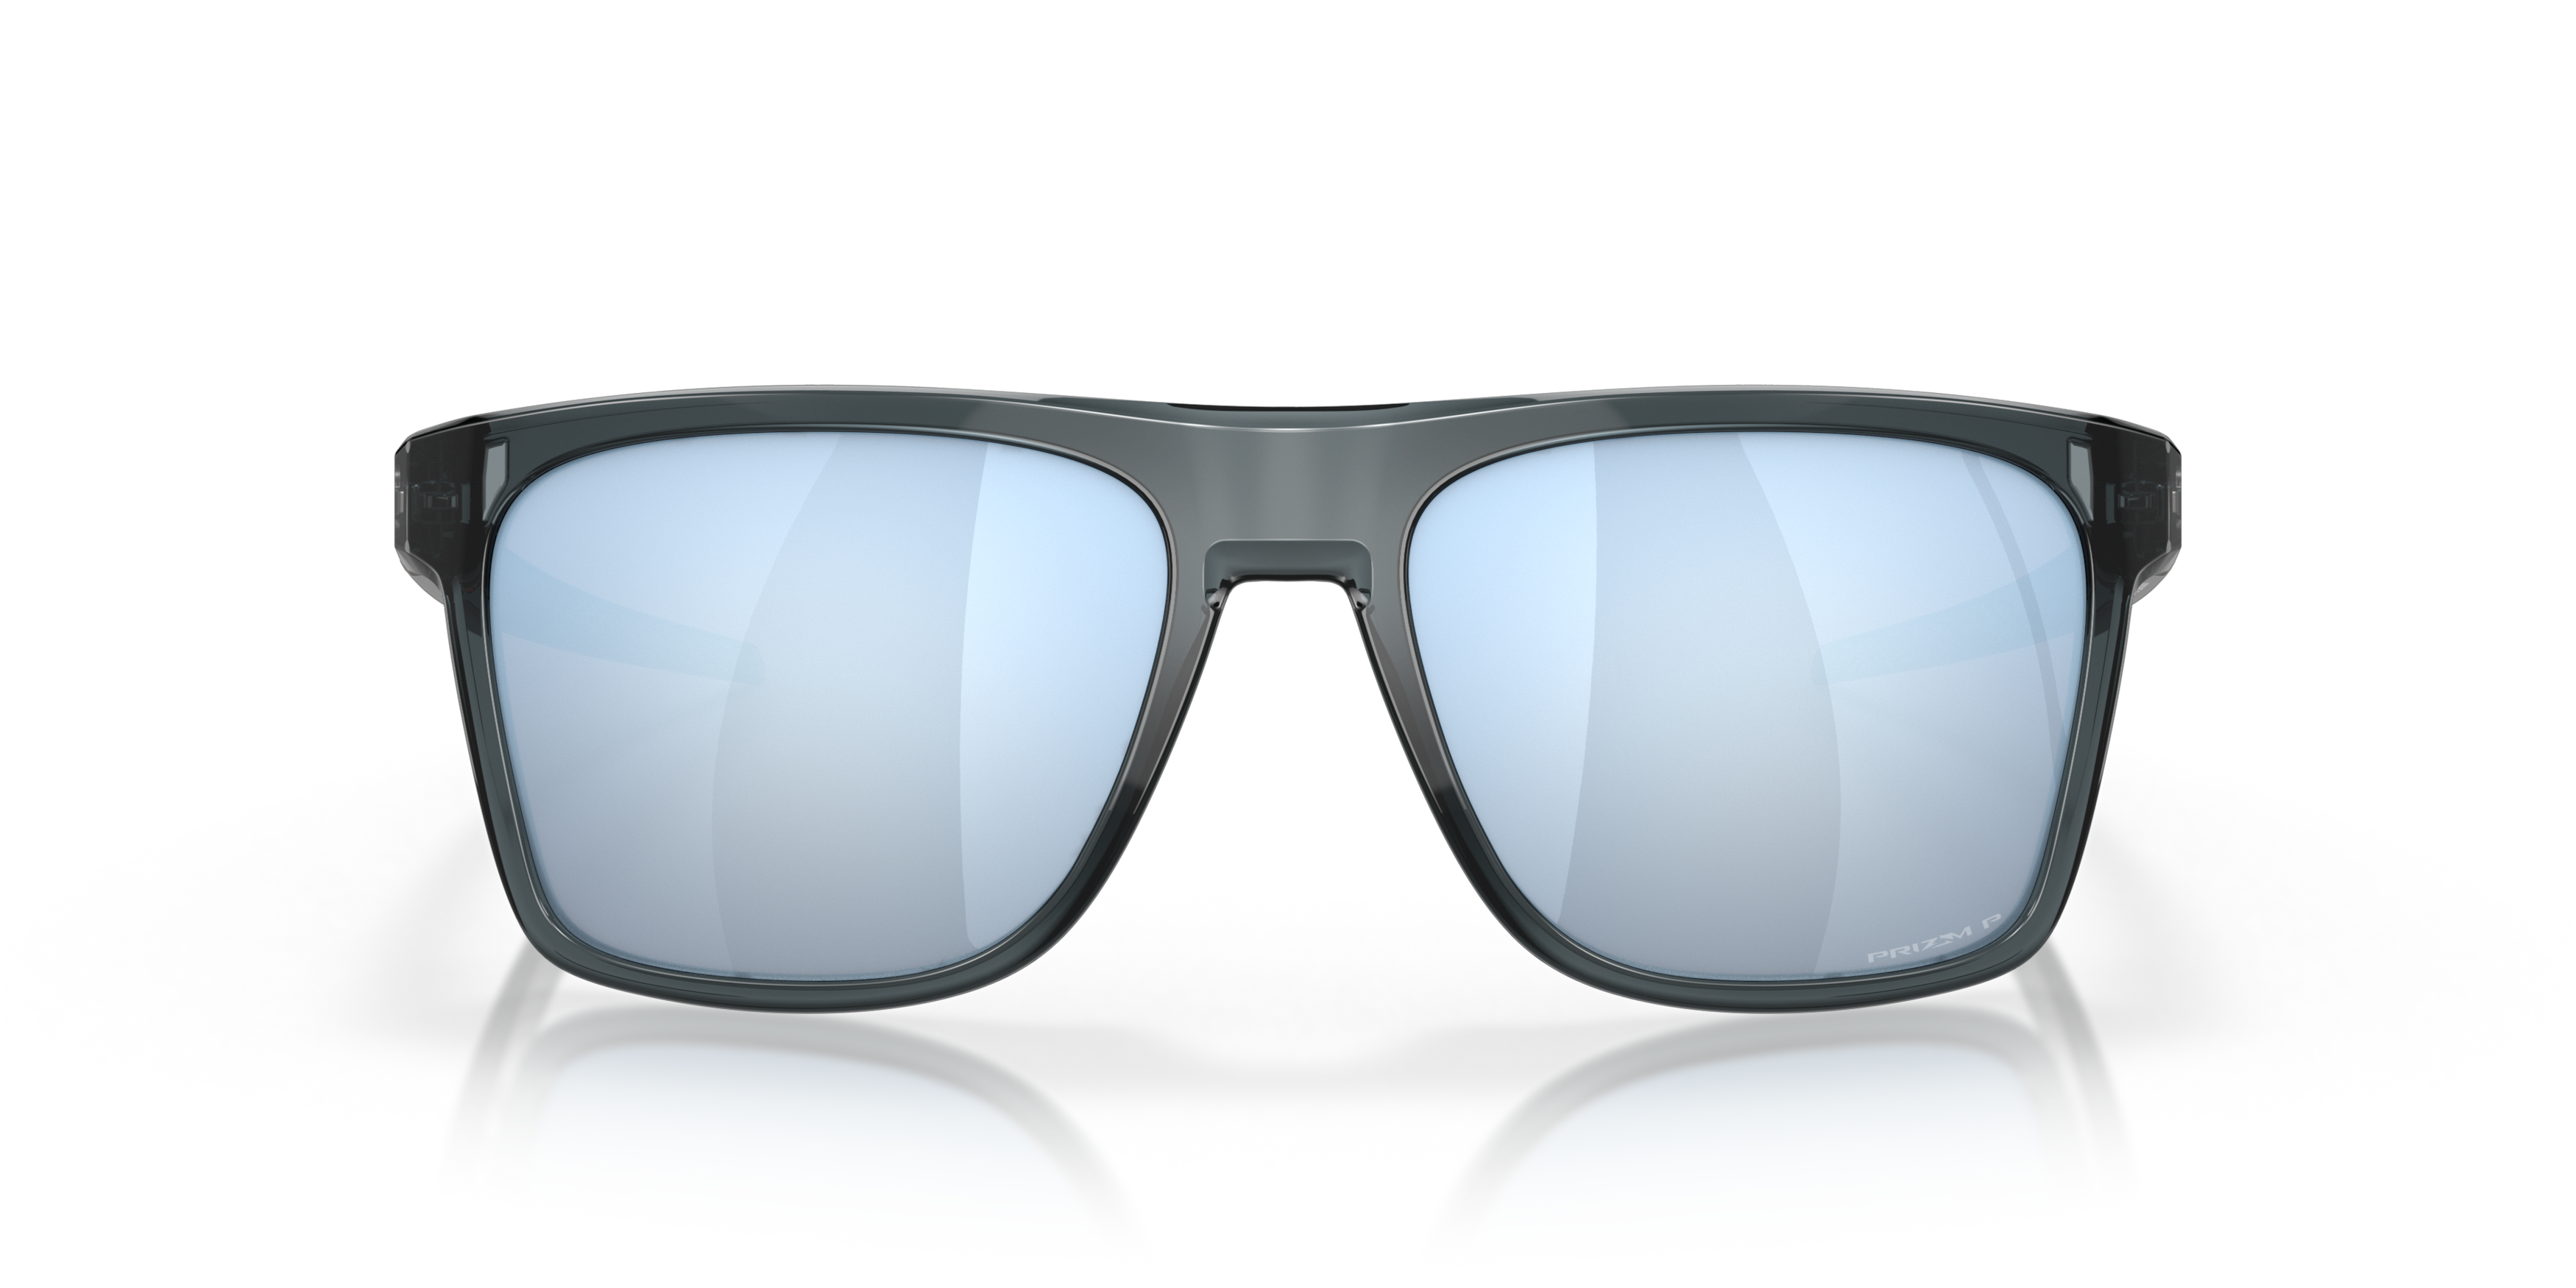 [products.image.front] OAKLEY OO9100 910005